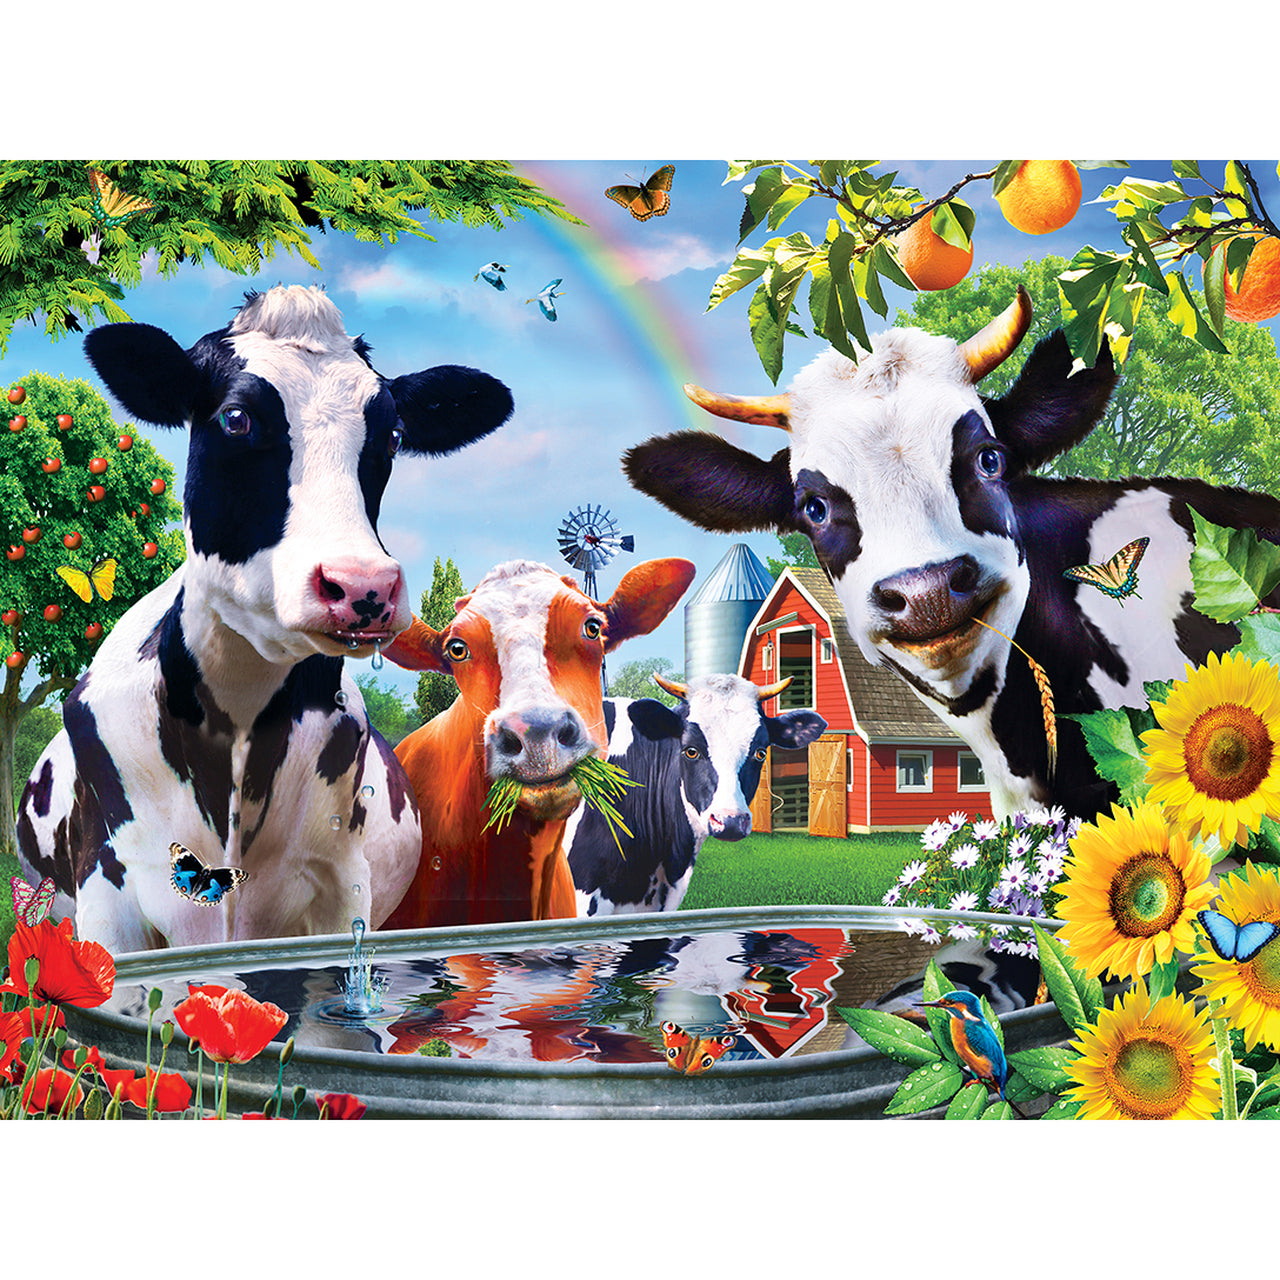 Green Acres Linen - Moo Love Large 300 Piece EZGrip Jigsaw Puzzle by Masterpieces